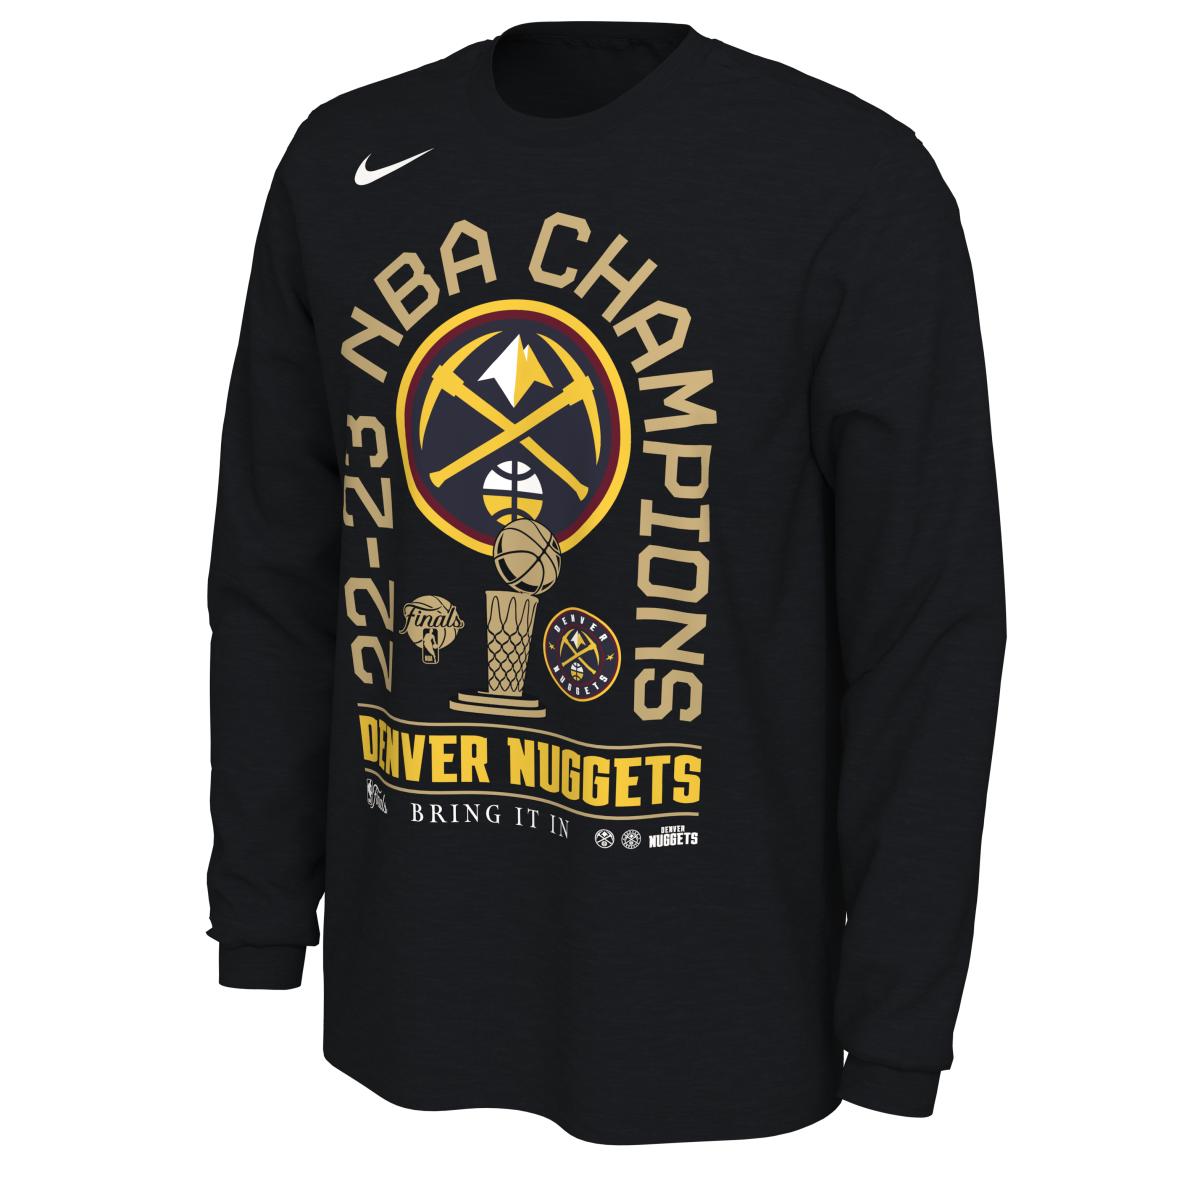 Denver Nuggets NBA Champions, how to buy your Nuggets Championship gear